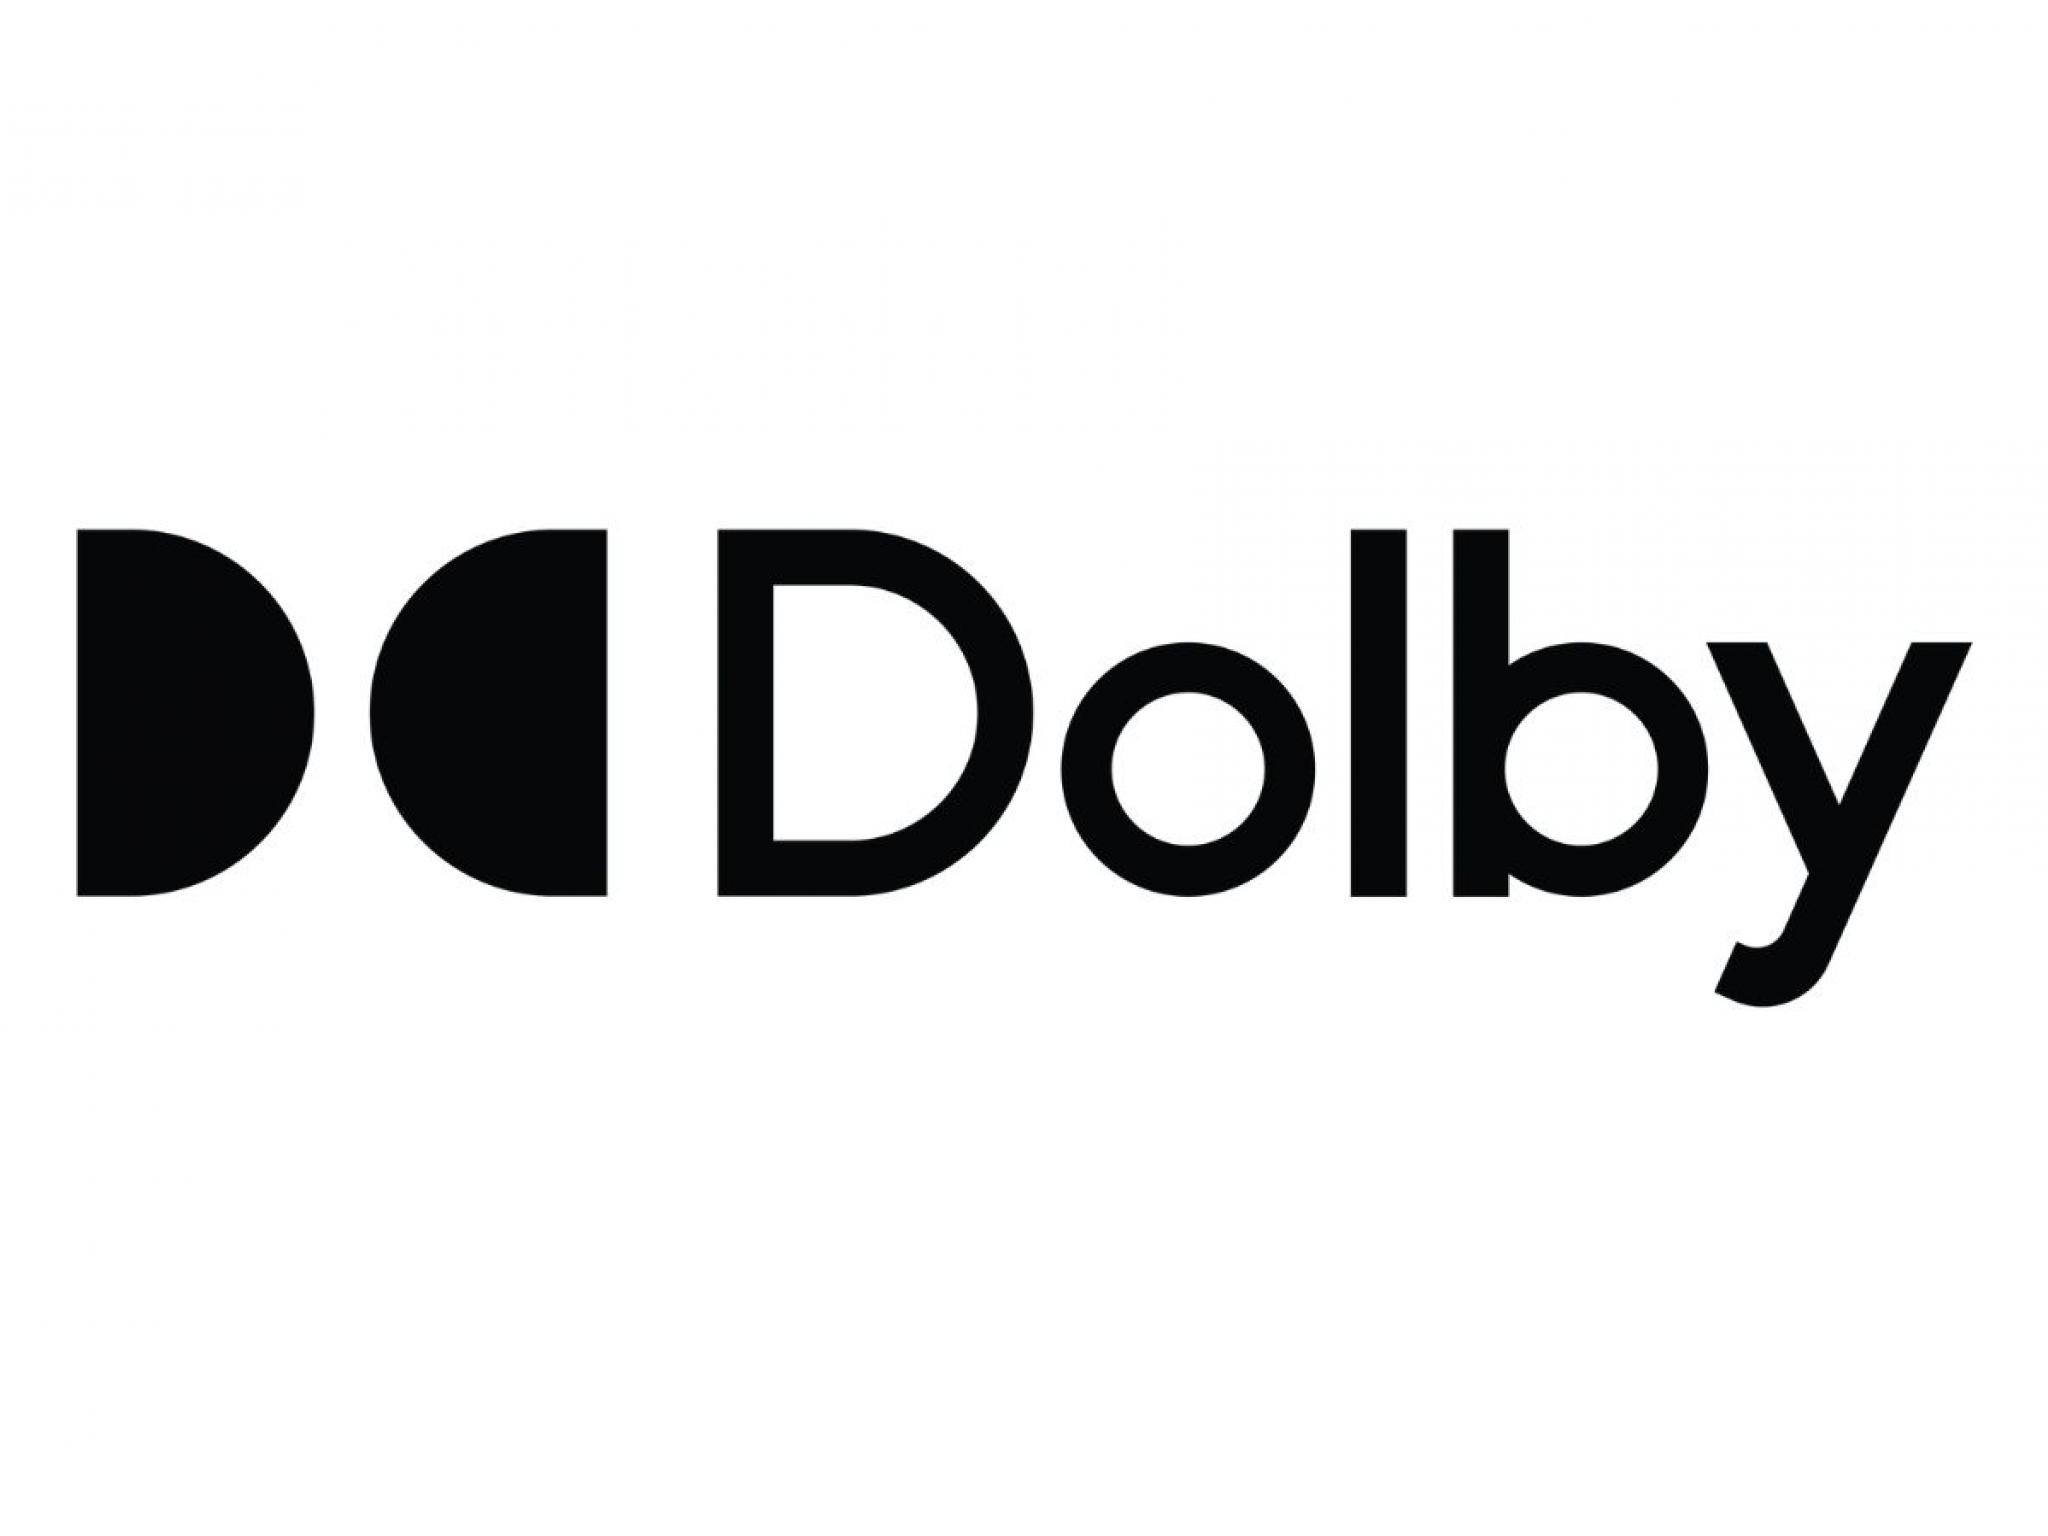  why-dolby-laboratories-shares-are-trading-lower-by-around-8-here-are-other-stocks-moving-in-fridays-mid-day-session 